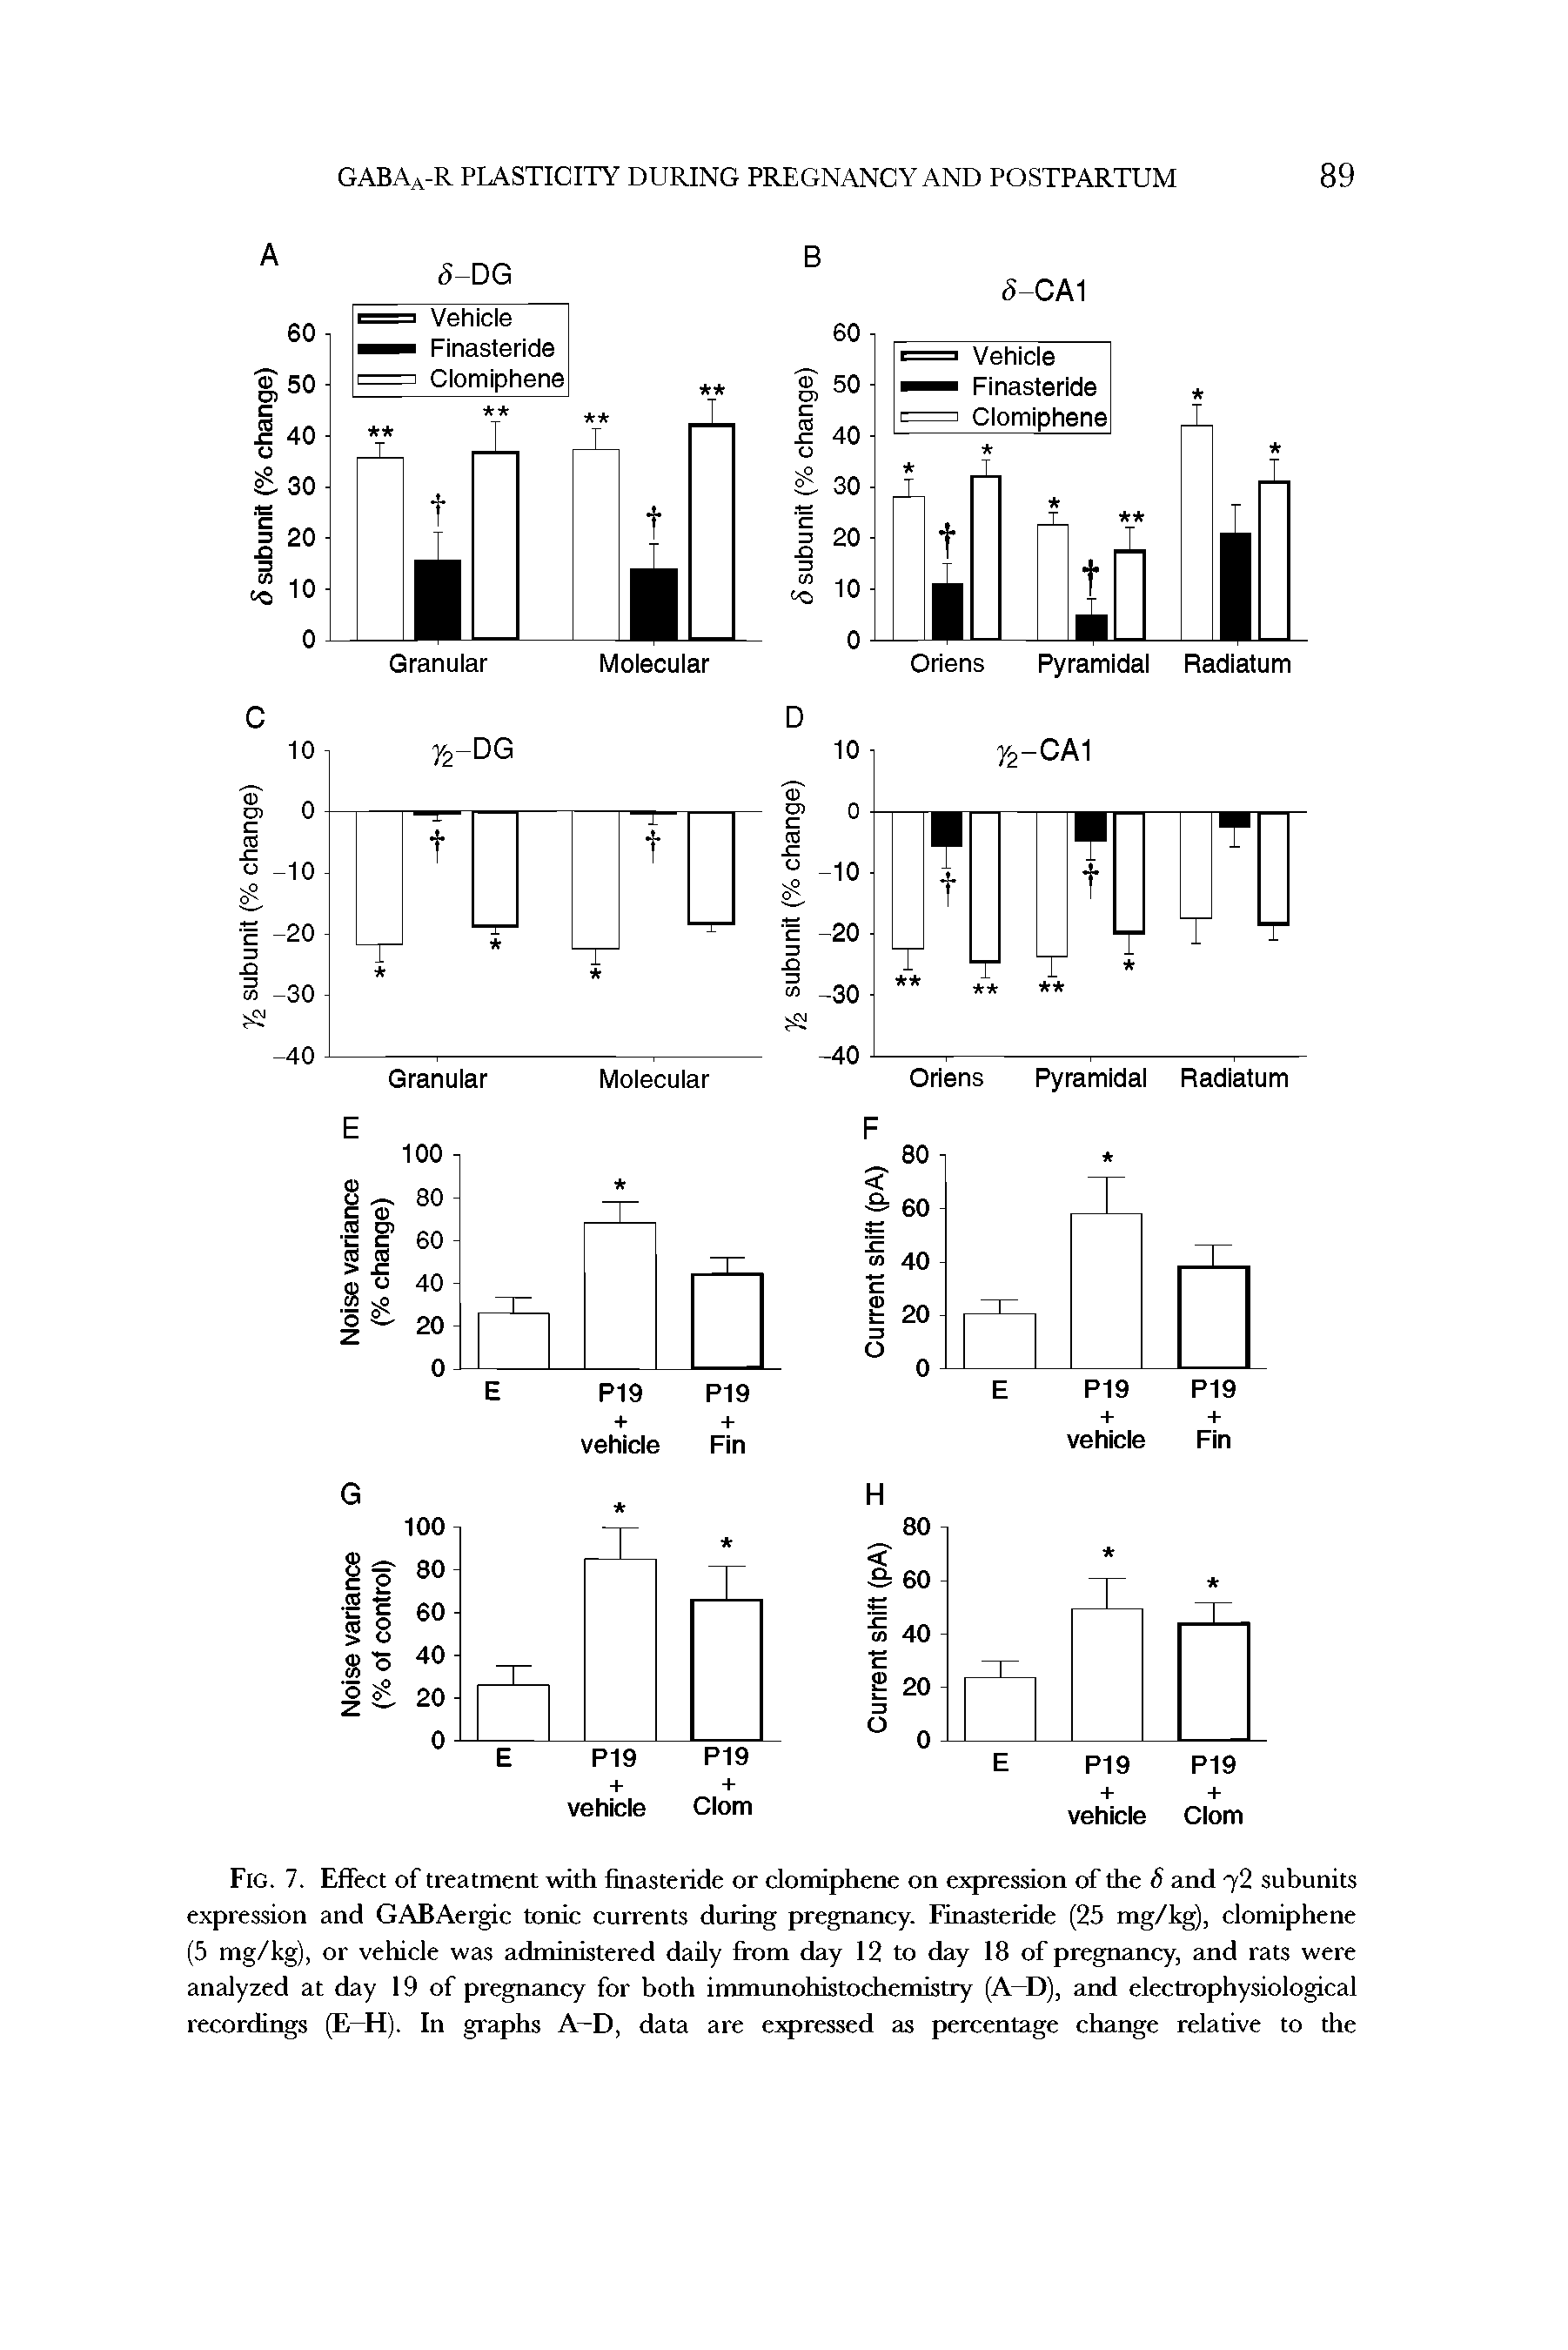 Fig. 7. Effect of treatment with finasteride or clomiphene on expression of the 6 and 72 subunits expression and GABAergic tonic currents during pregnancy. Finasteride (25 mg/kg), clomiphene (5 mg/kg), or vehicle was administered daily from day 12 to day 18 of pregnancy, and rats were analyzed at day 19 of pregnancy for both immunohistochemistry (A—D), and electrophysiological recordings (E—H). In graphs A—D, data are expressed as percentage change relative to the...